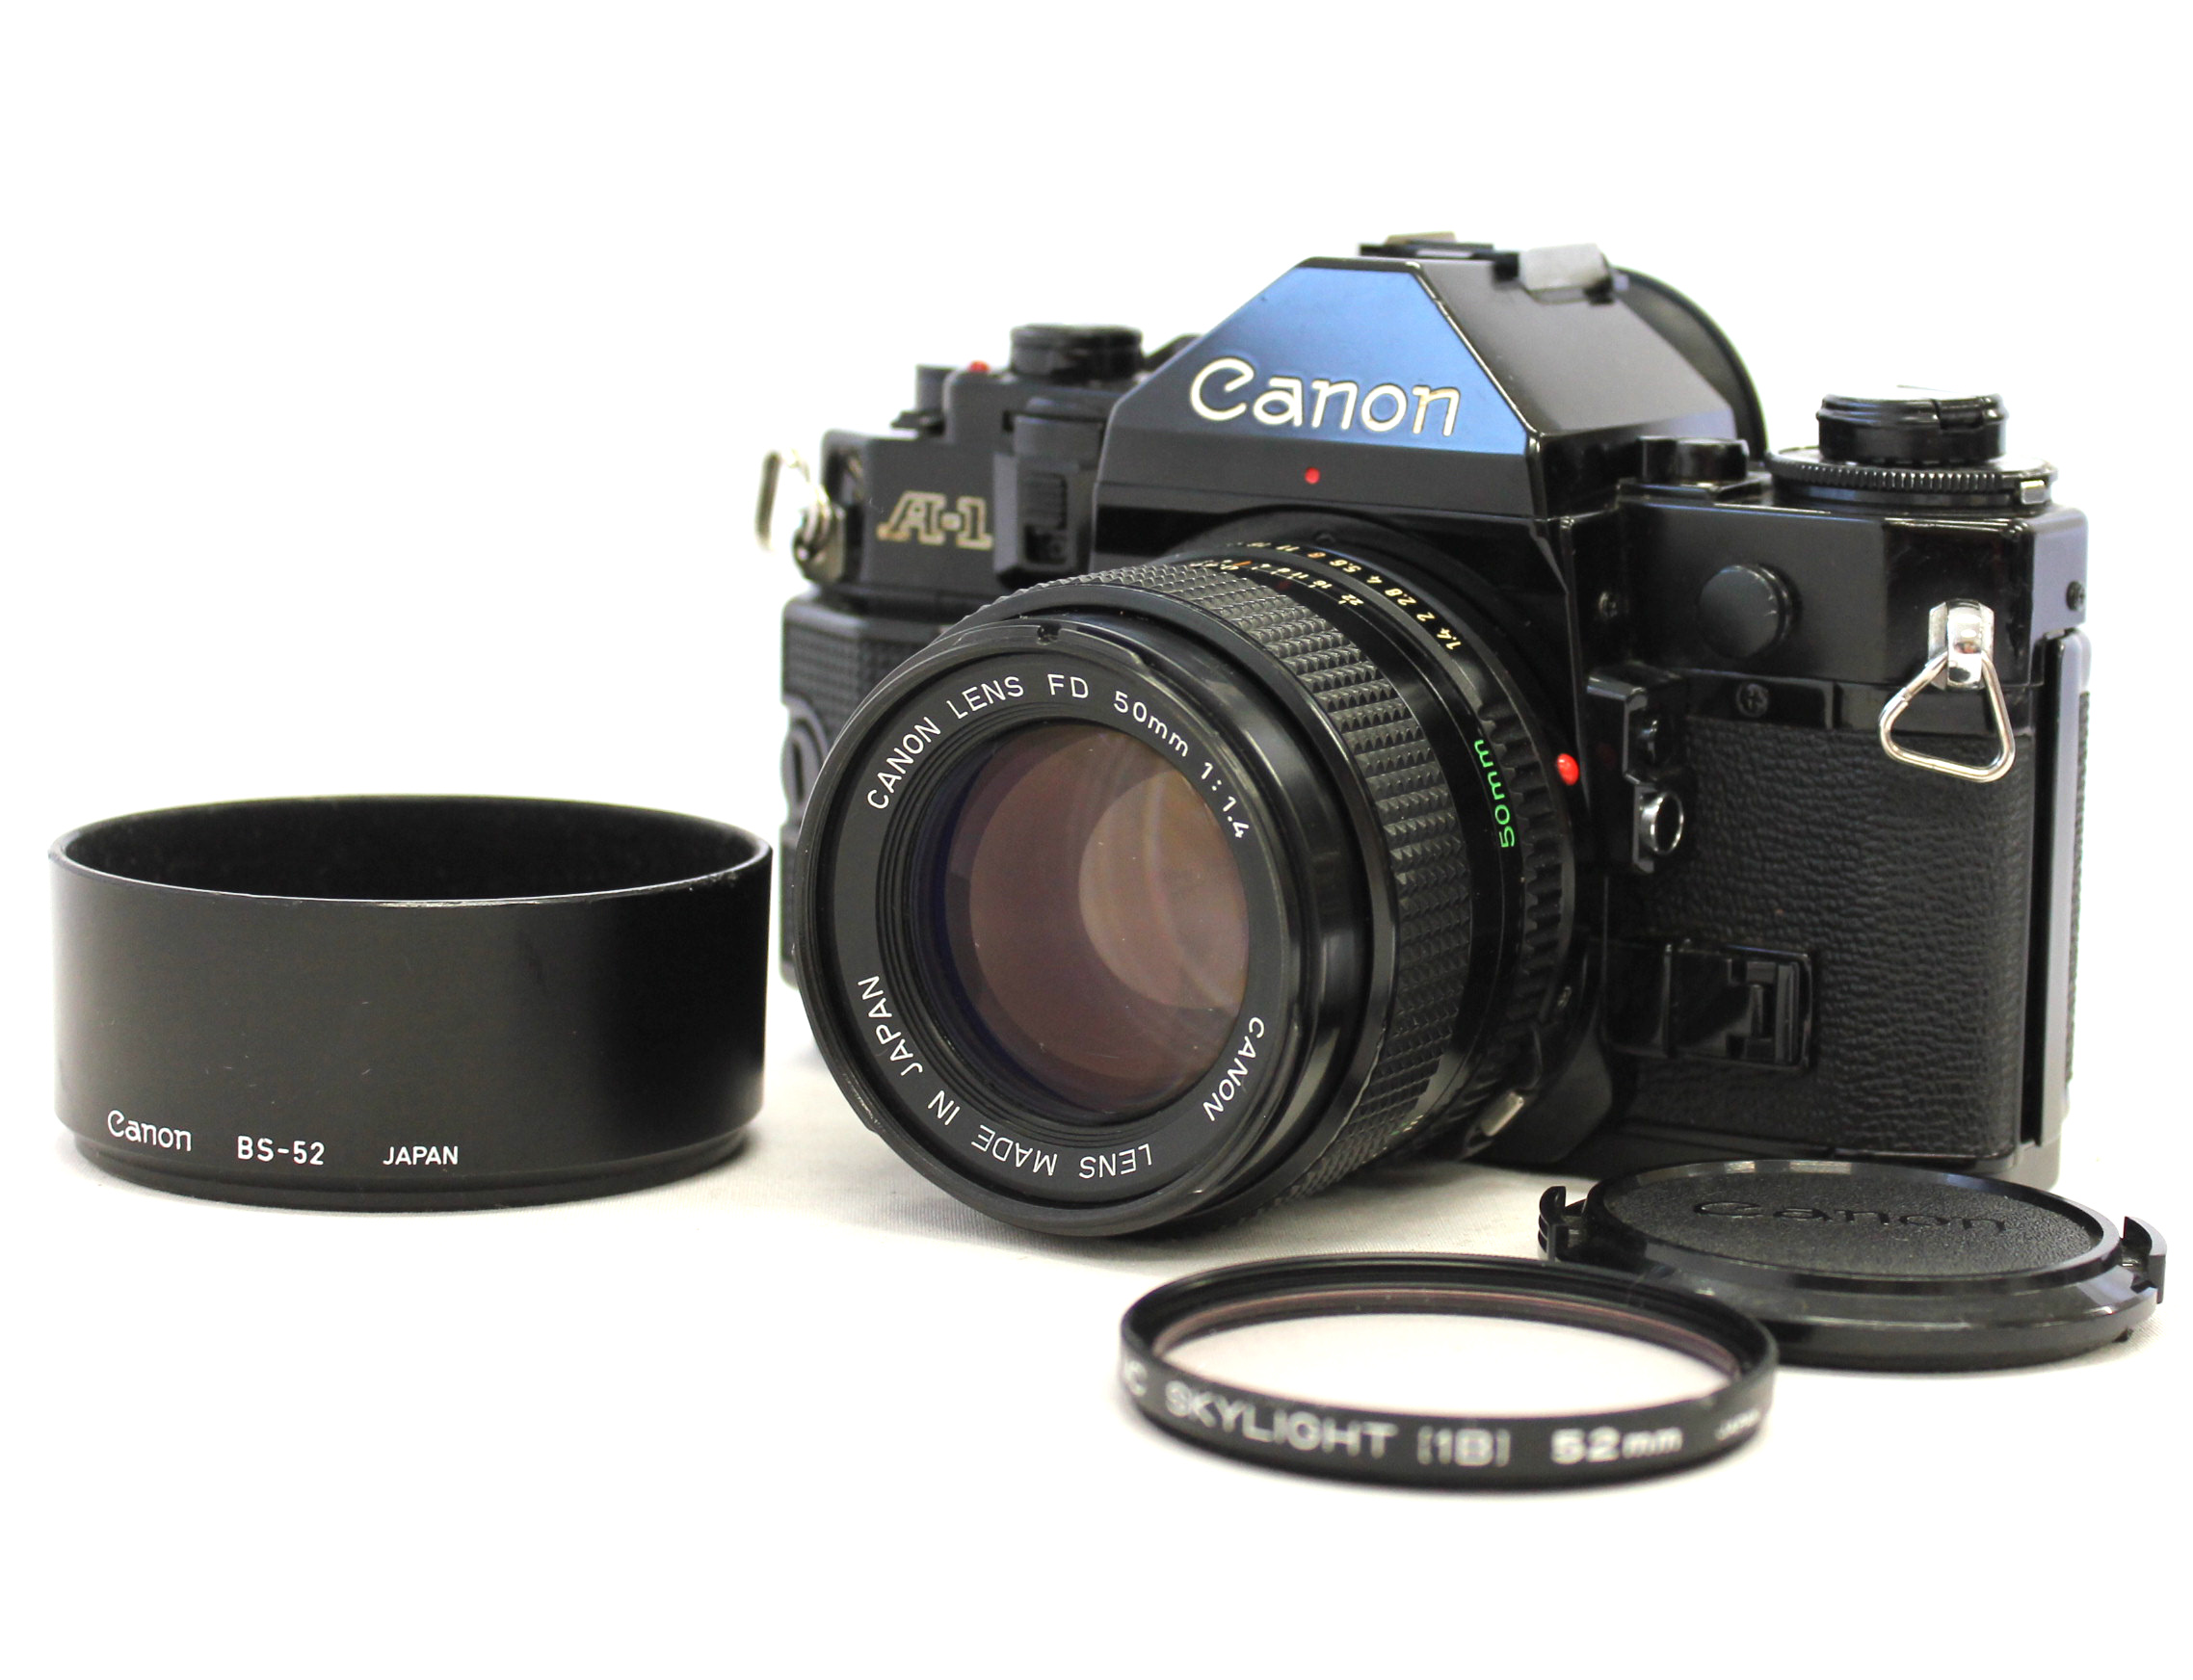 Japan Used Camera Shop | [Exc+++] Canon A-1 35mm SLR Camera w/ New FD 50mm F/1.4 Lens and Hood from Japan